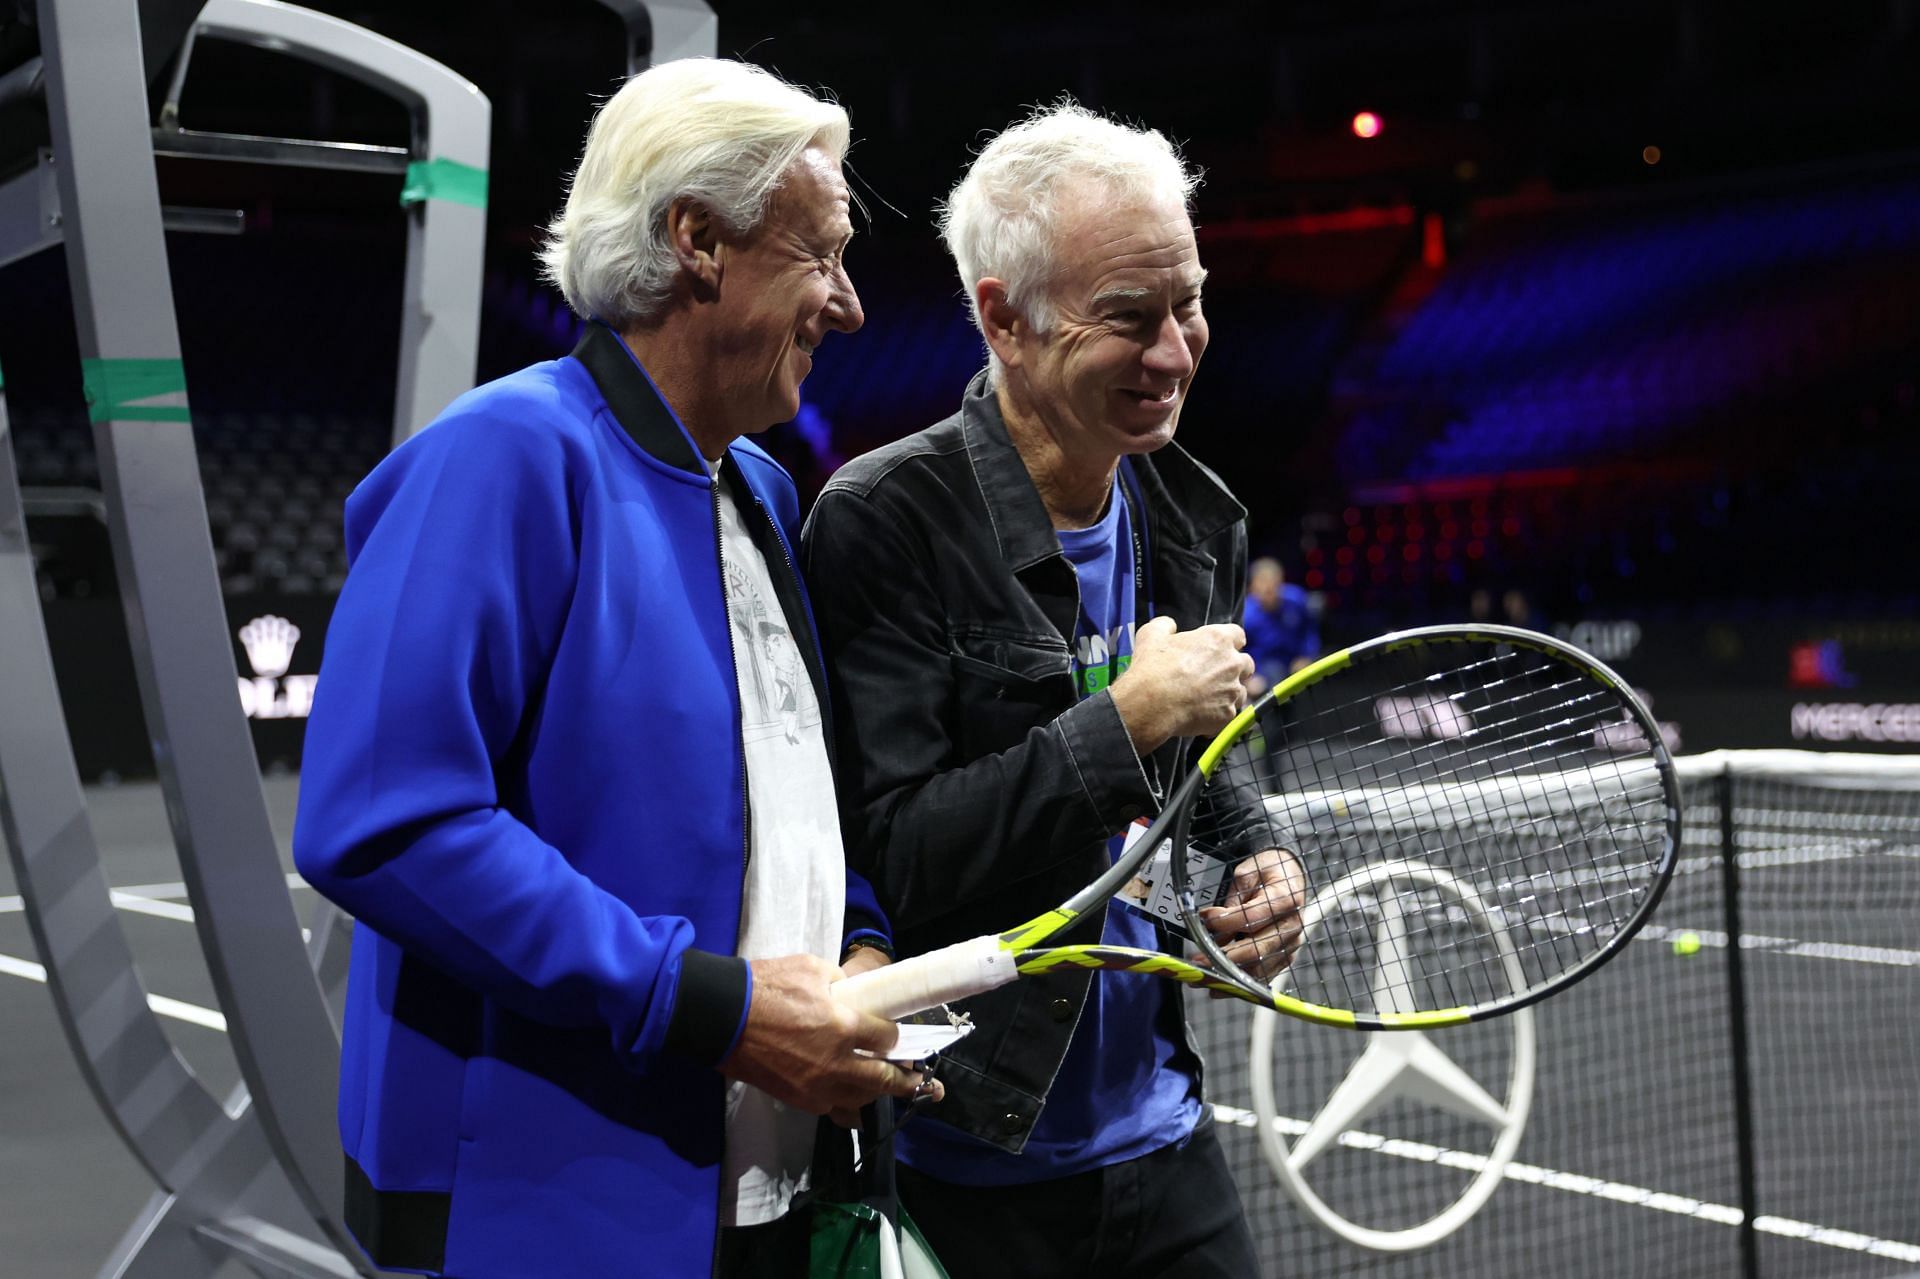 meesterwerk wat betreft heilig He accepted me: When John McEnroe recalled being calmed down by Bjorn Borg  in the middle of a match